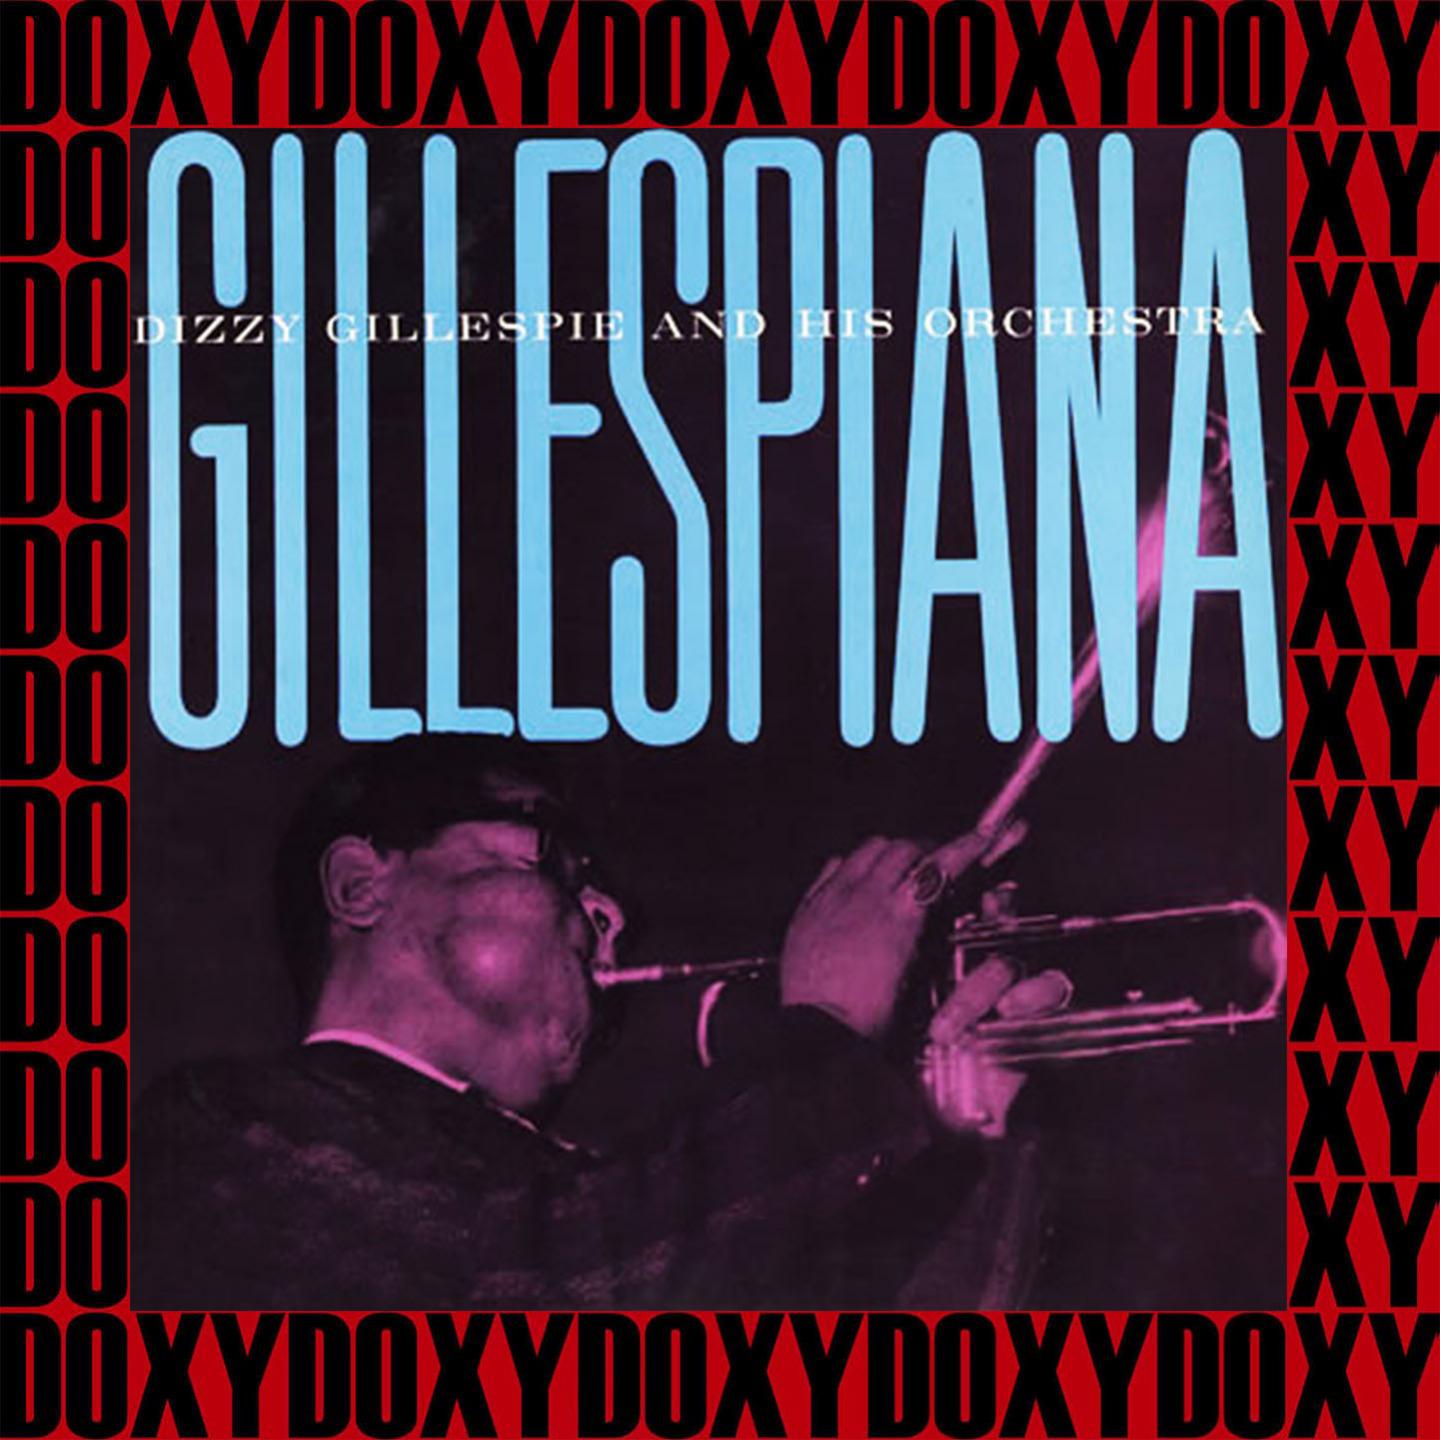 Gillespiana (Remastered Version) (Doxy Collection)